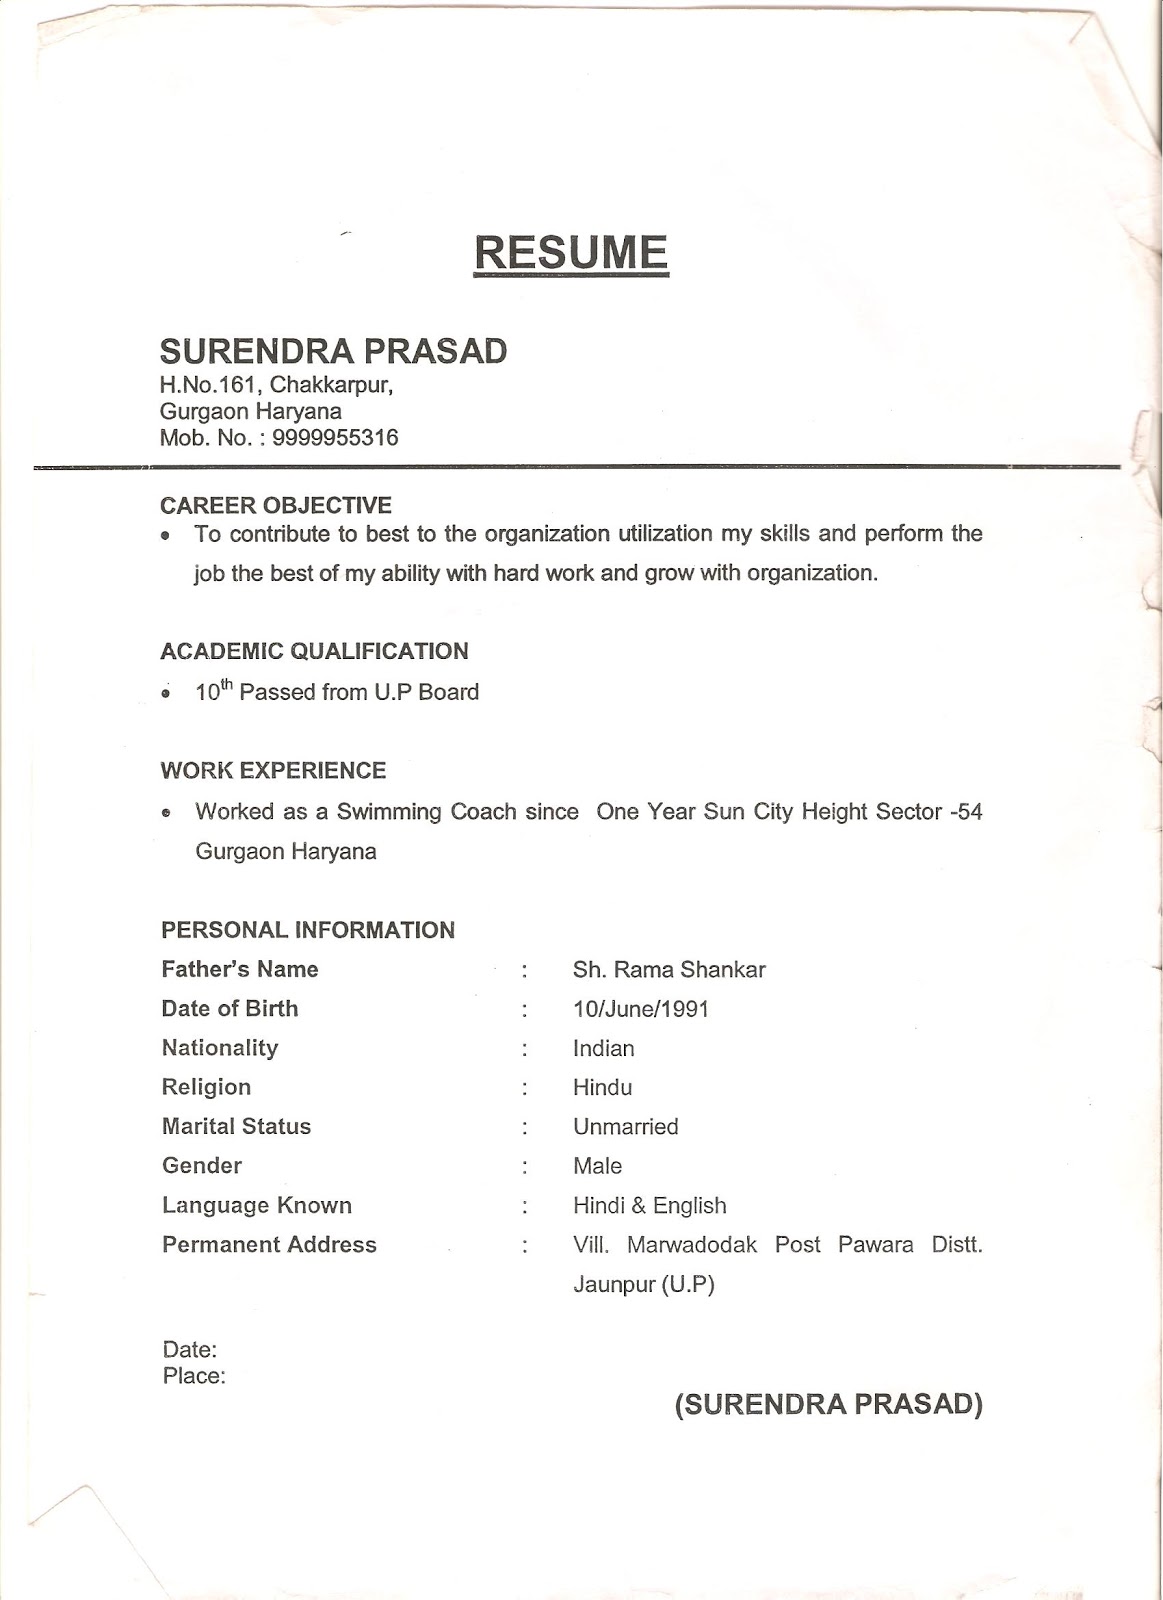 Indian resume search